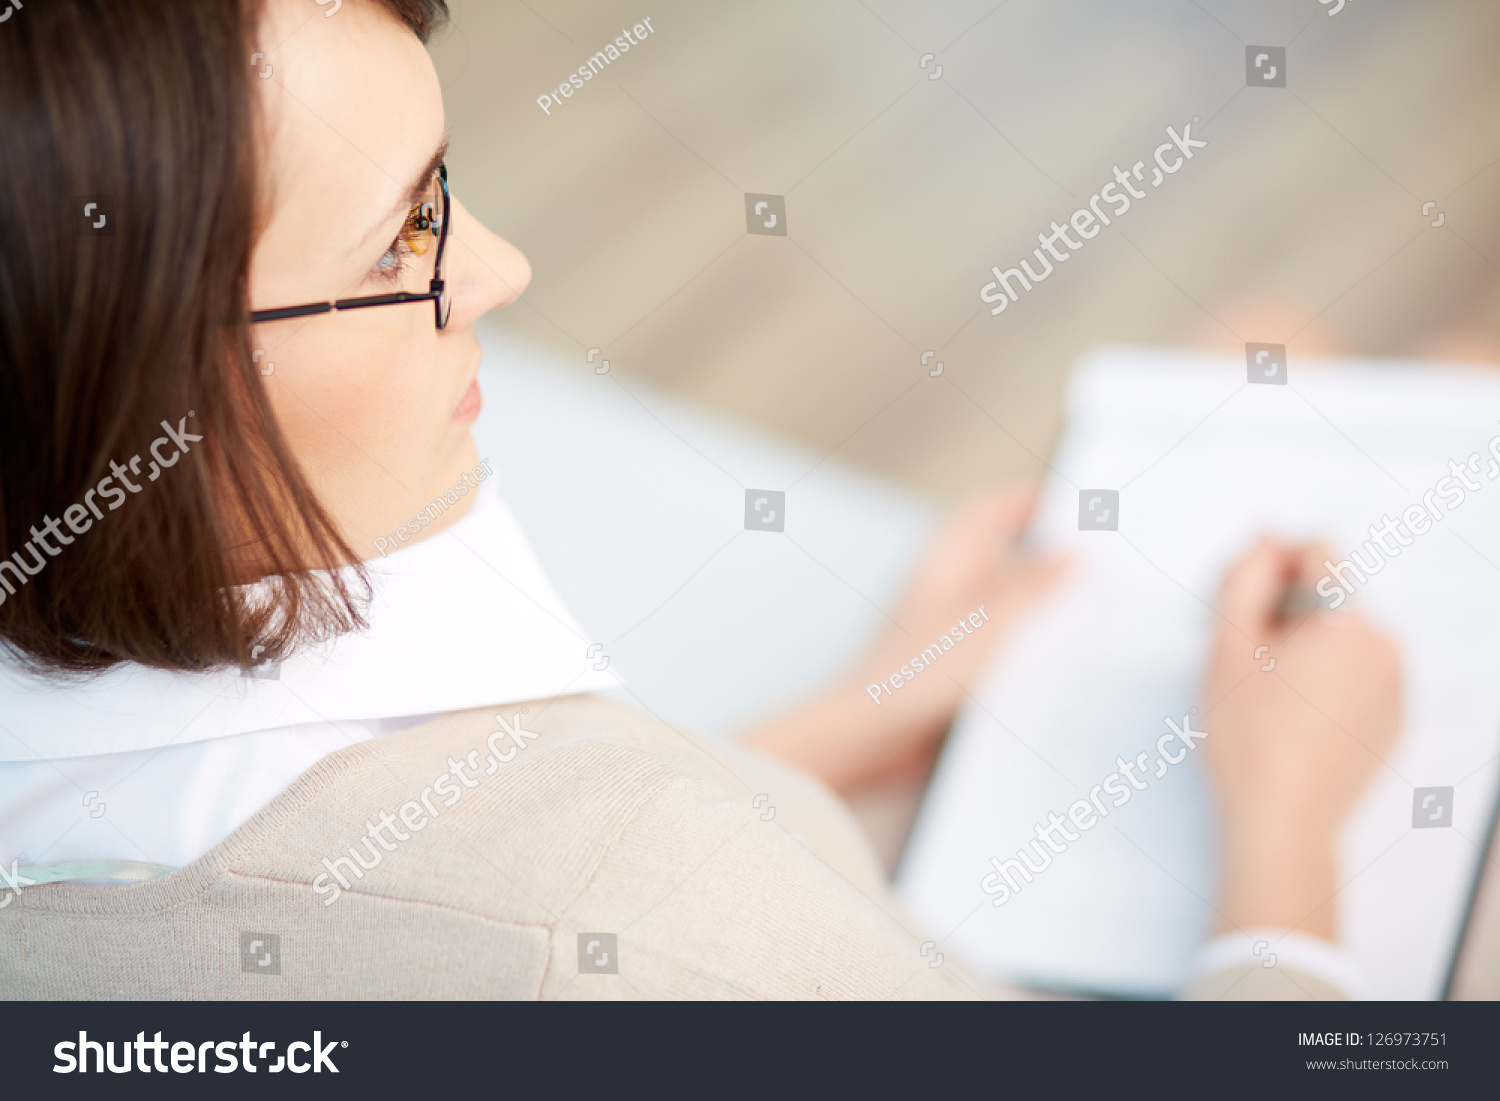 Professional psychiatrist keeping record during therapy session #126973751